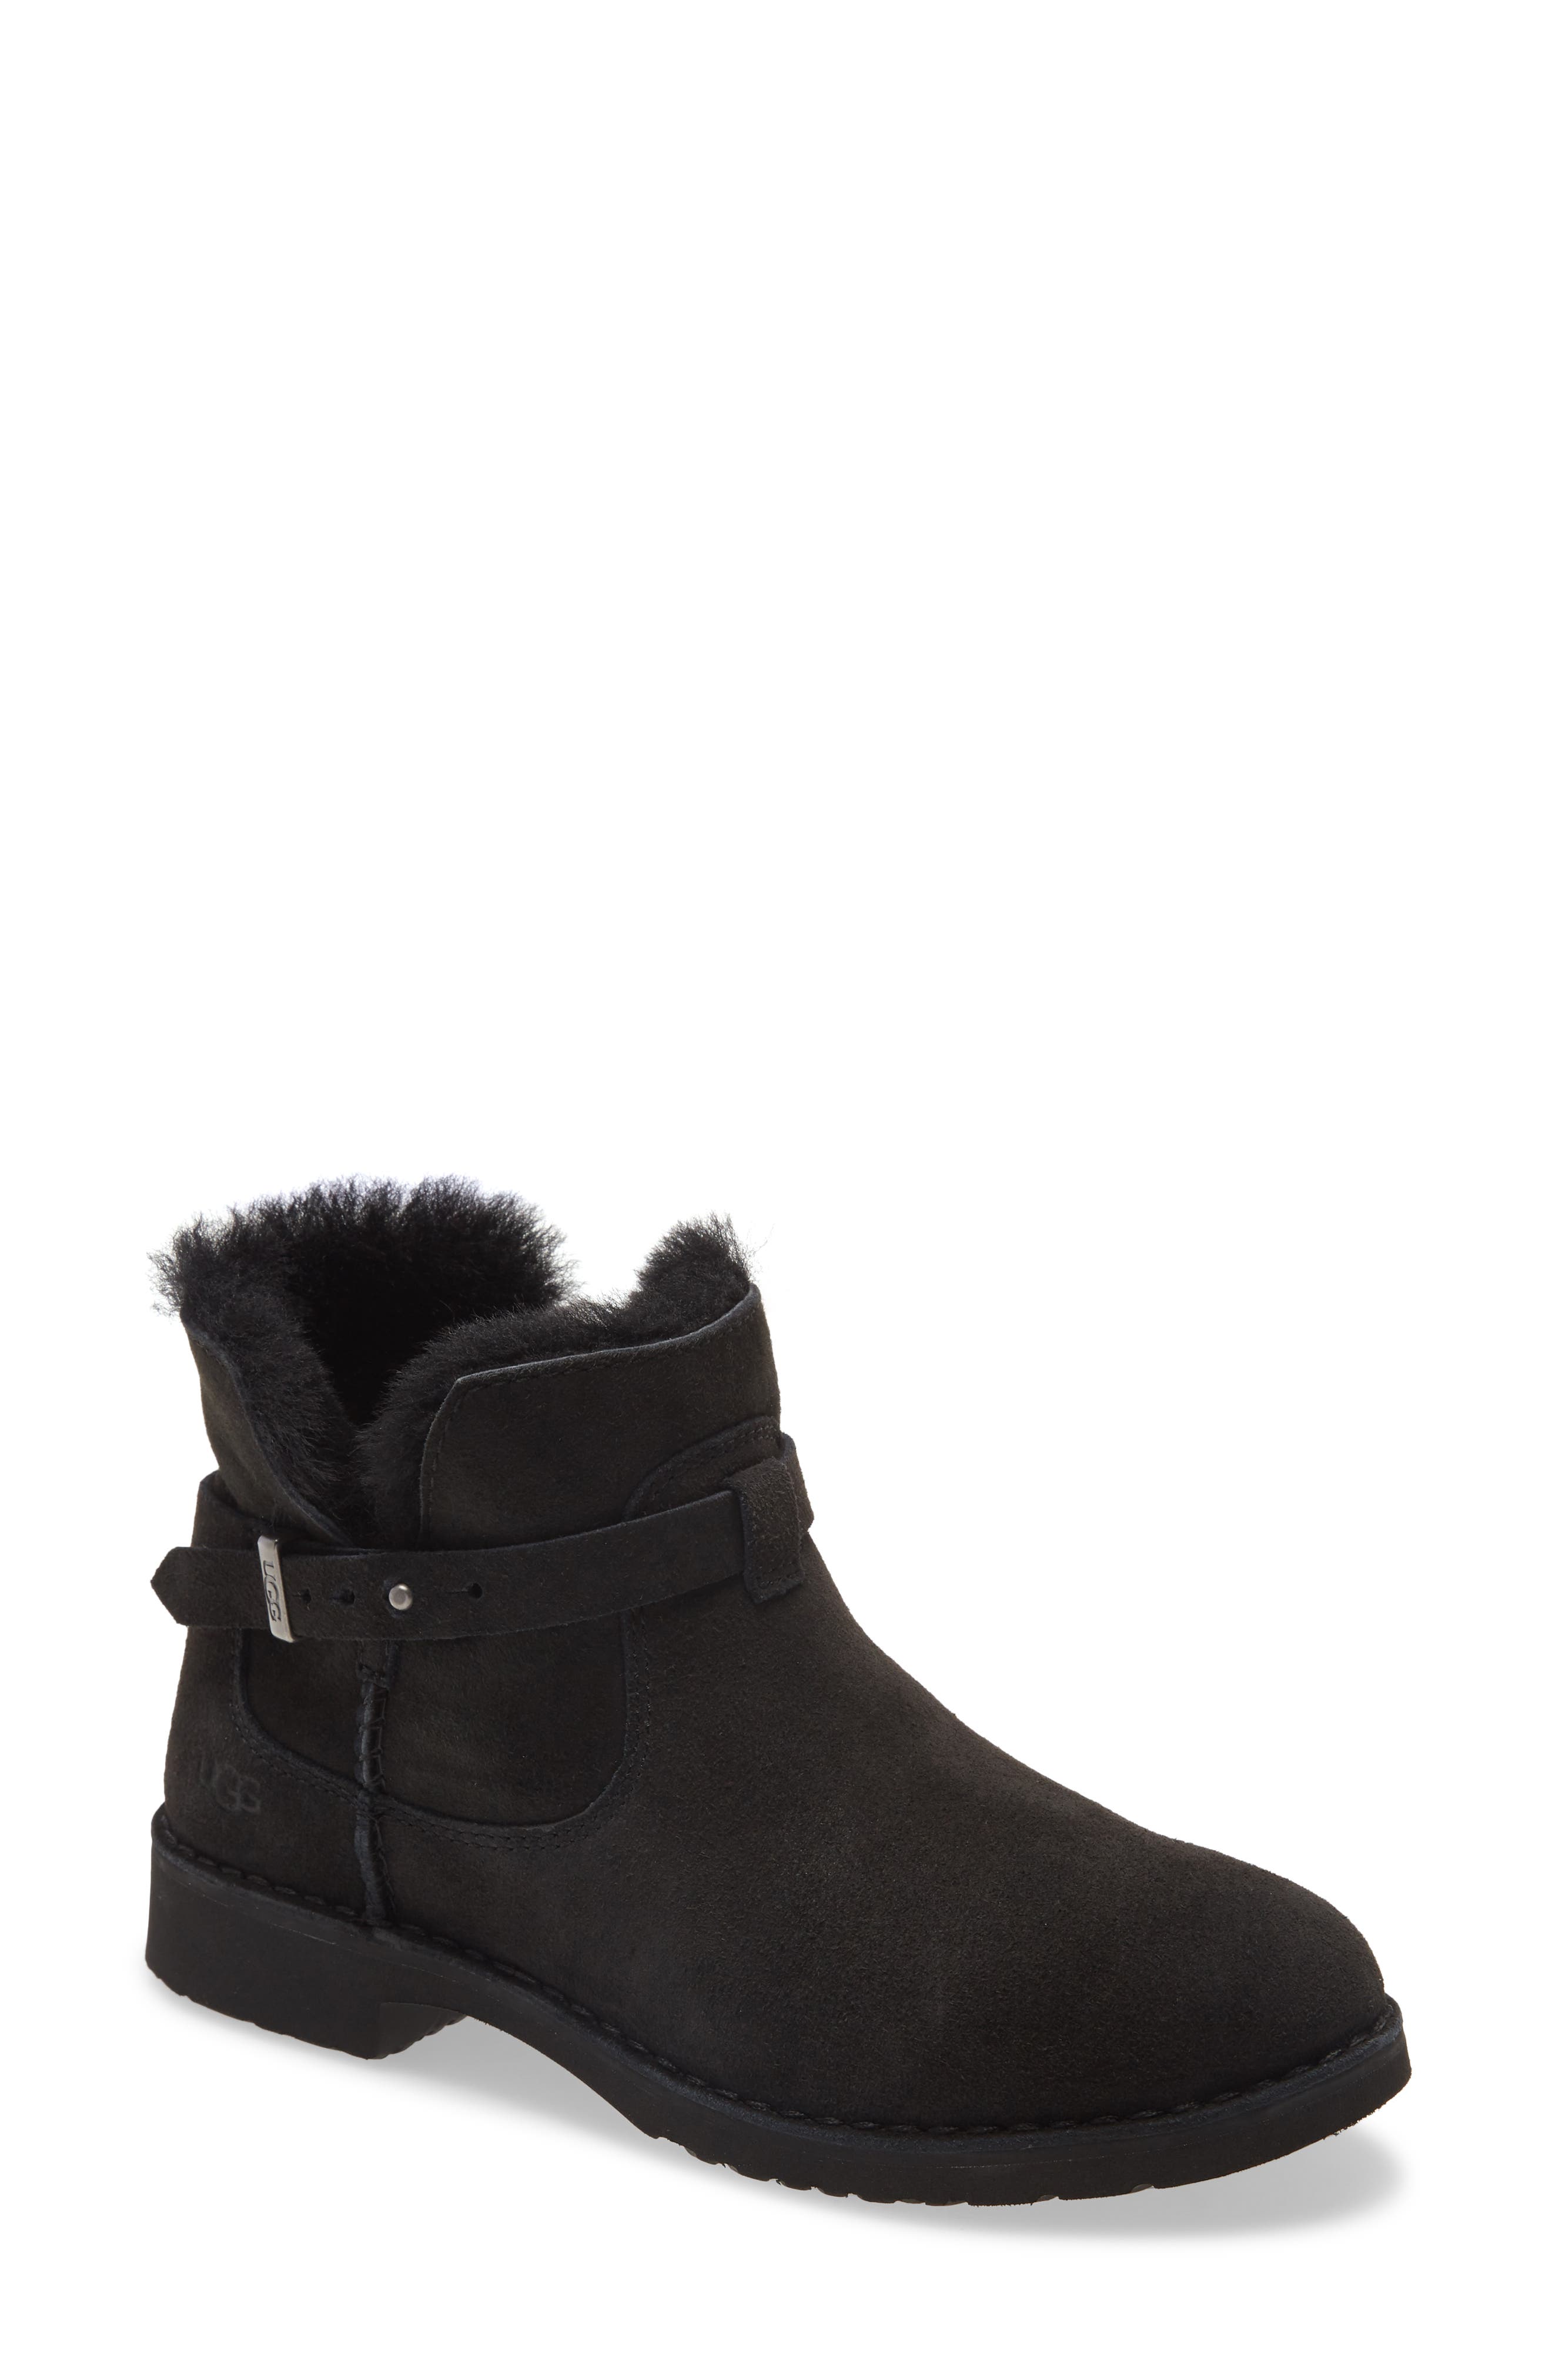 bootie boots on sale